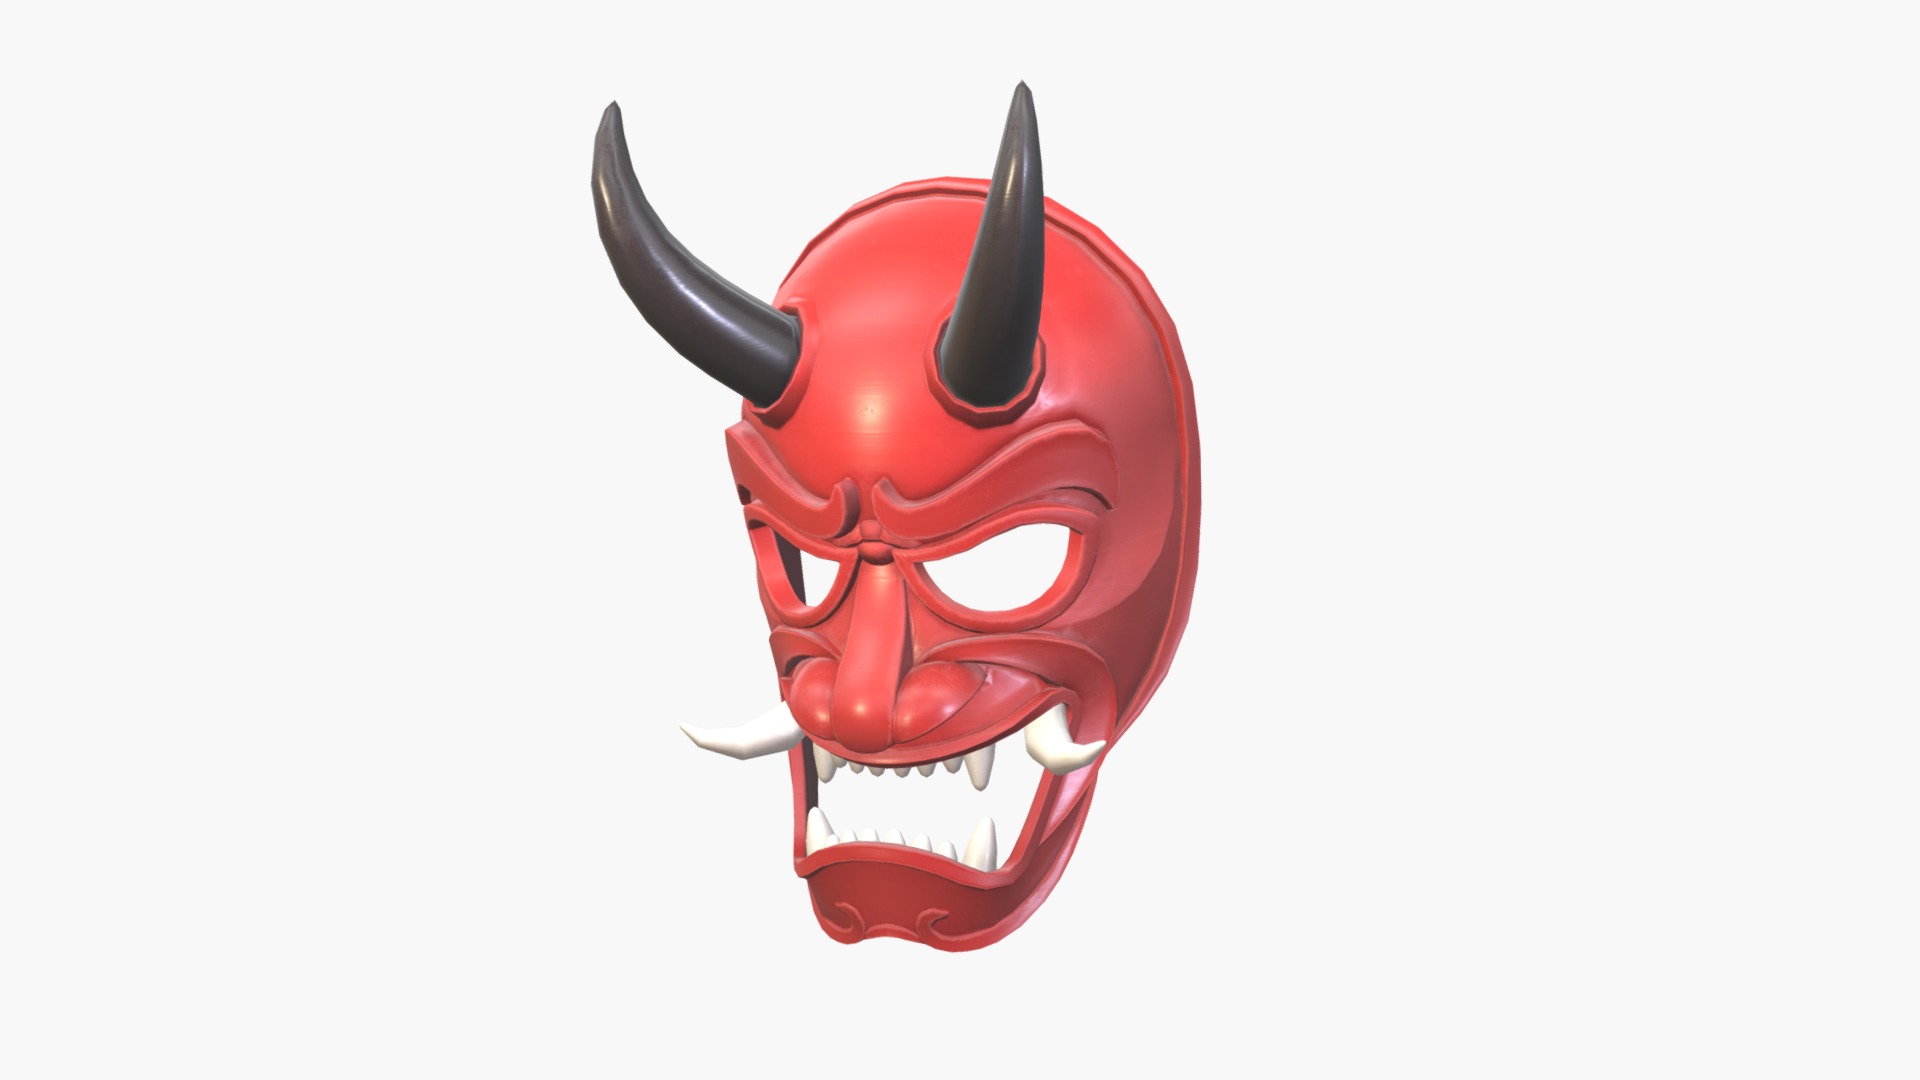 3D model Japanese Demon Mask - This is a 3D model of the Japanese Demon Mask. The 3D model is about a red and black cartoon character.